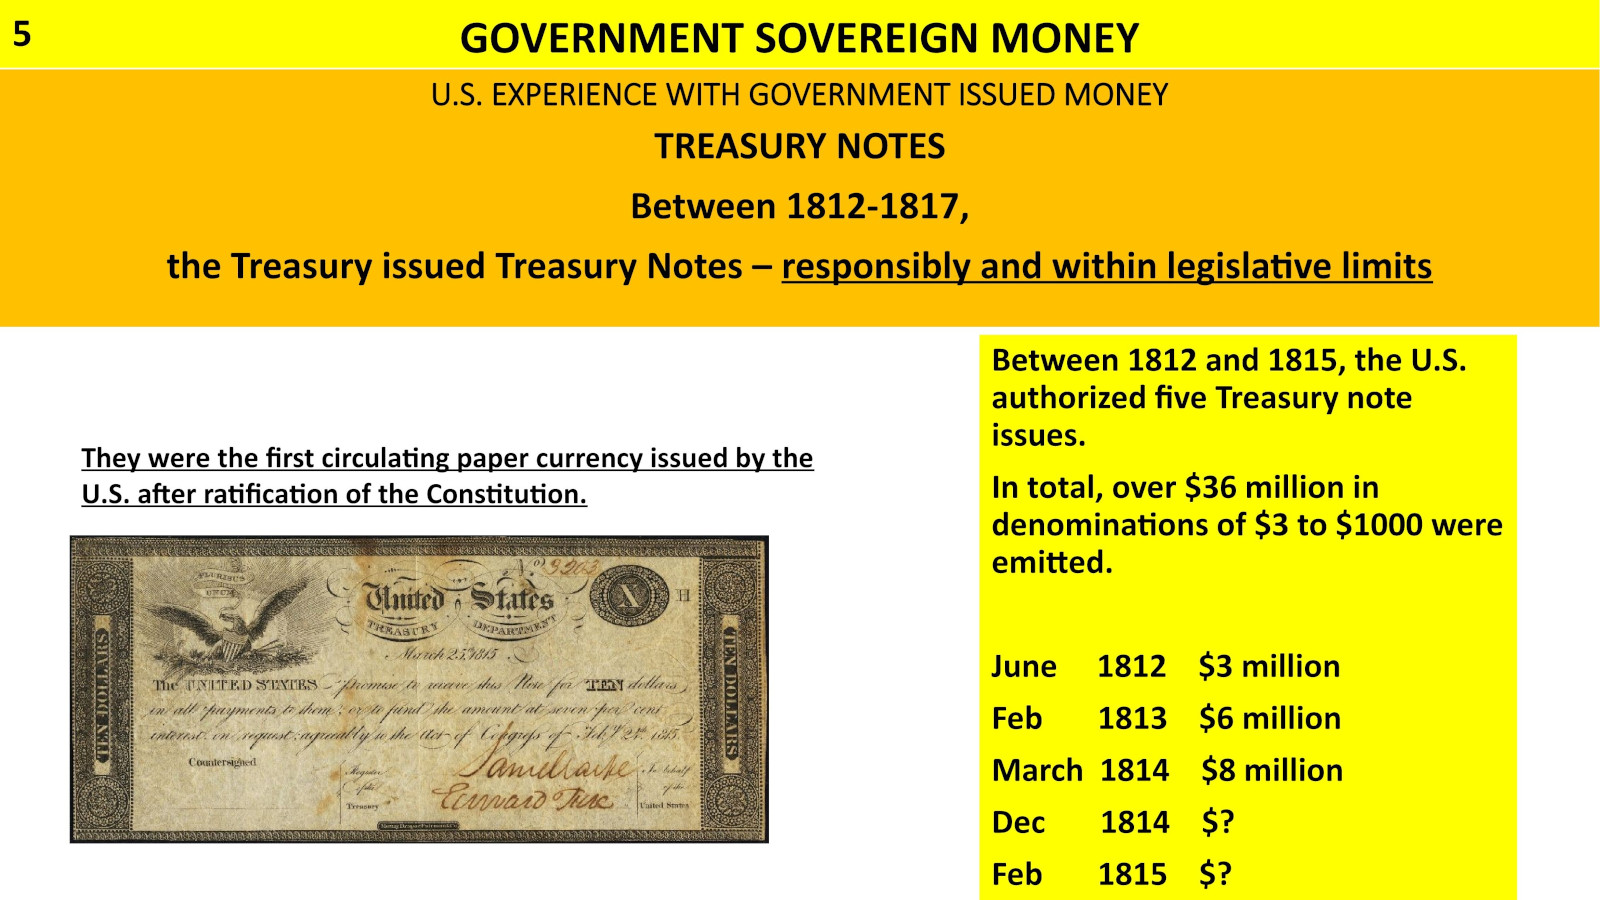 Experience with government issued money has been positive.